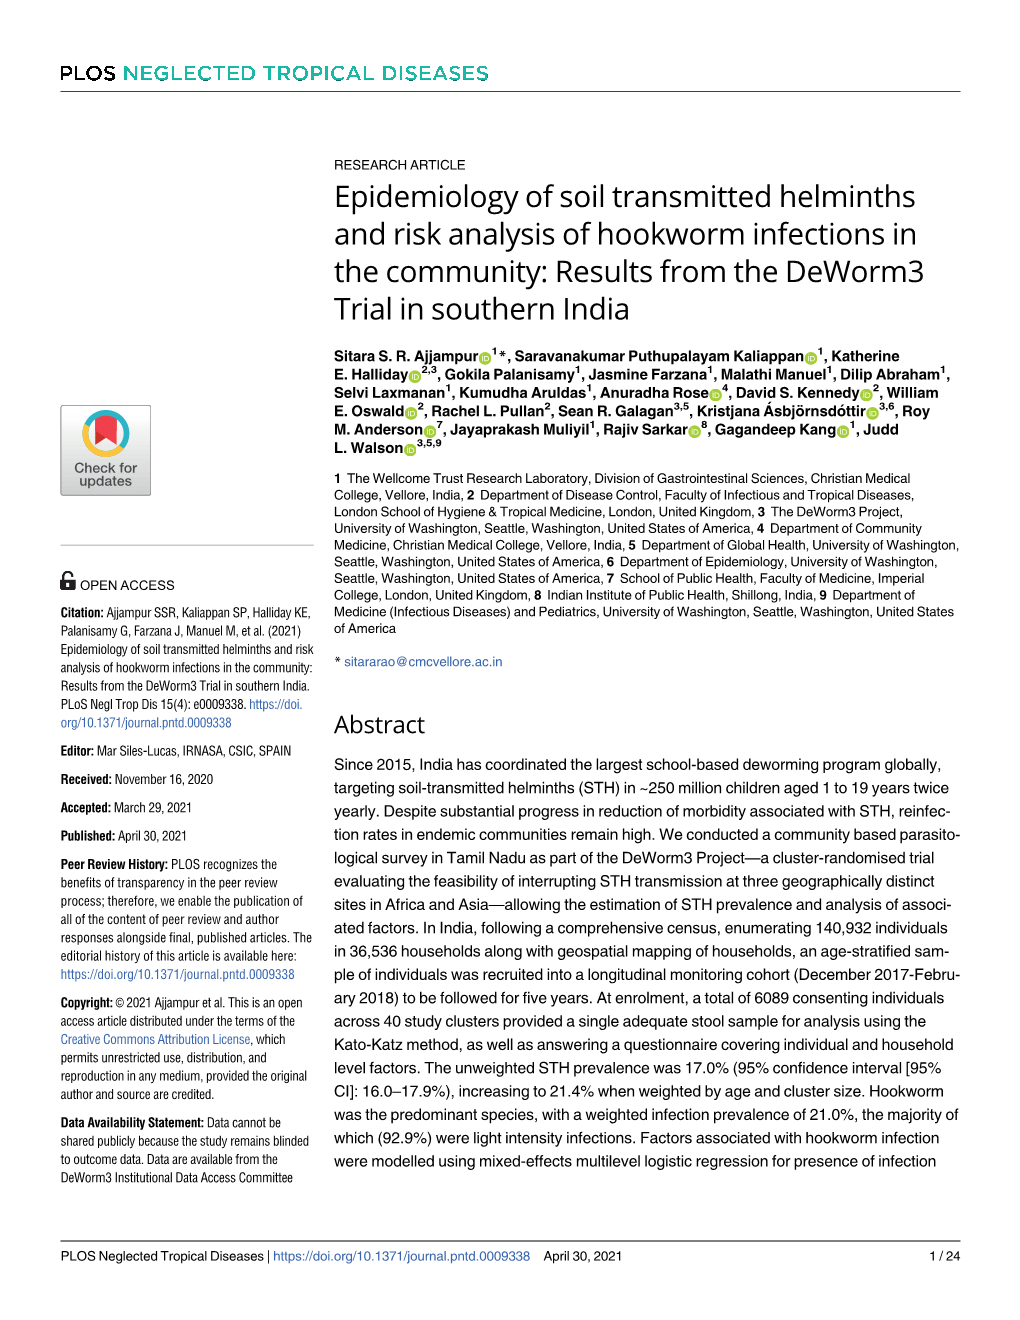 Epidemiology of Soil Transmitted Helminths and Risk Analysis of Hookworm Infections in the Community: Results from the Deworm3 Trial in Southern India